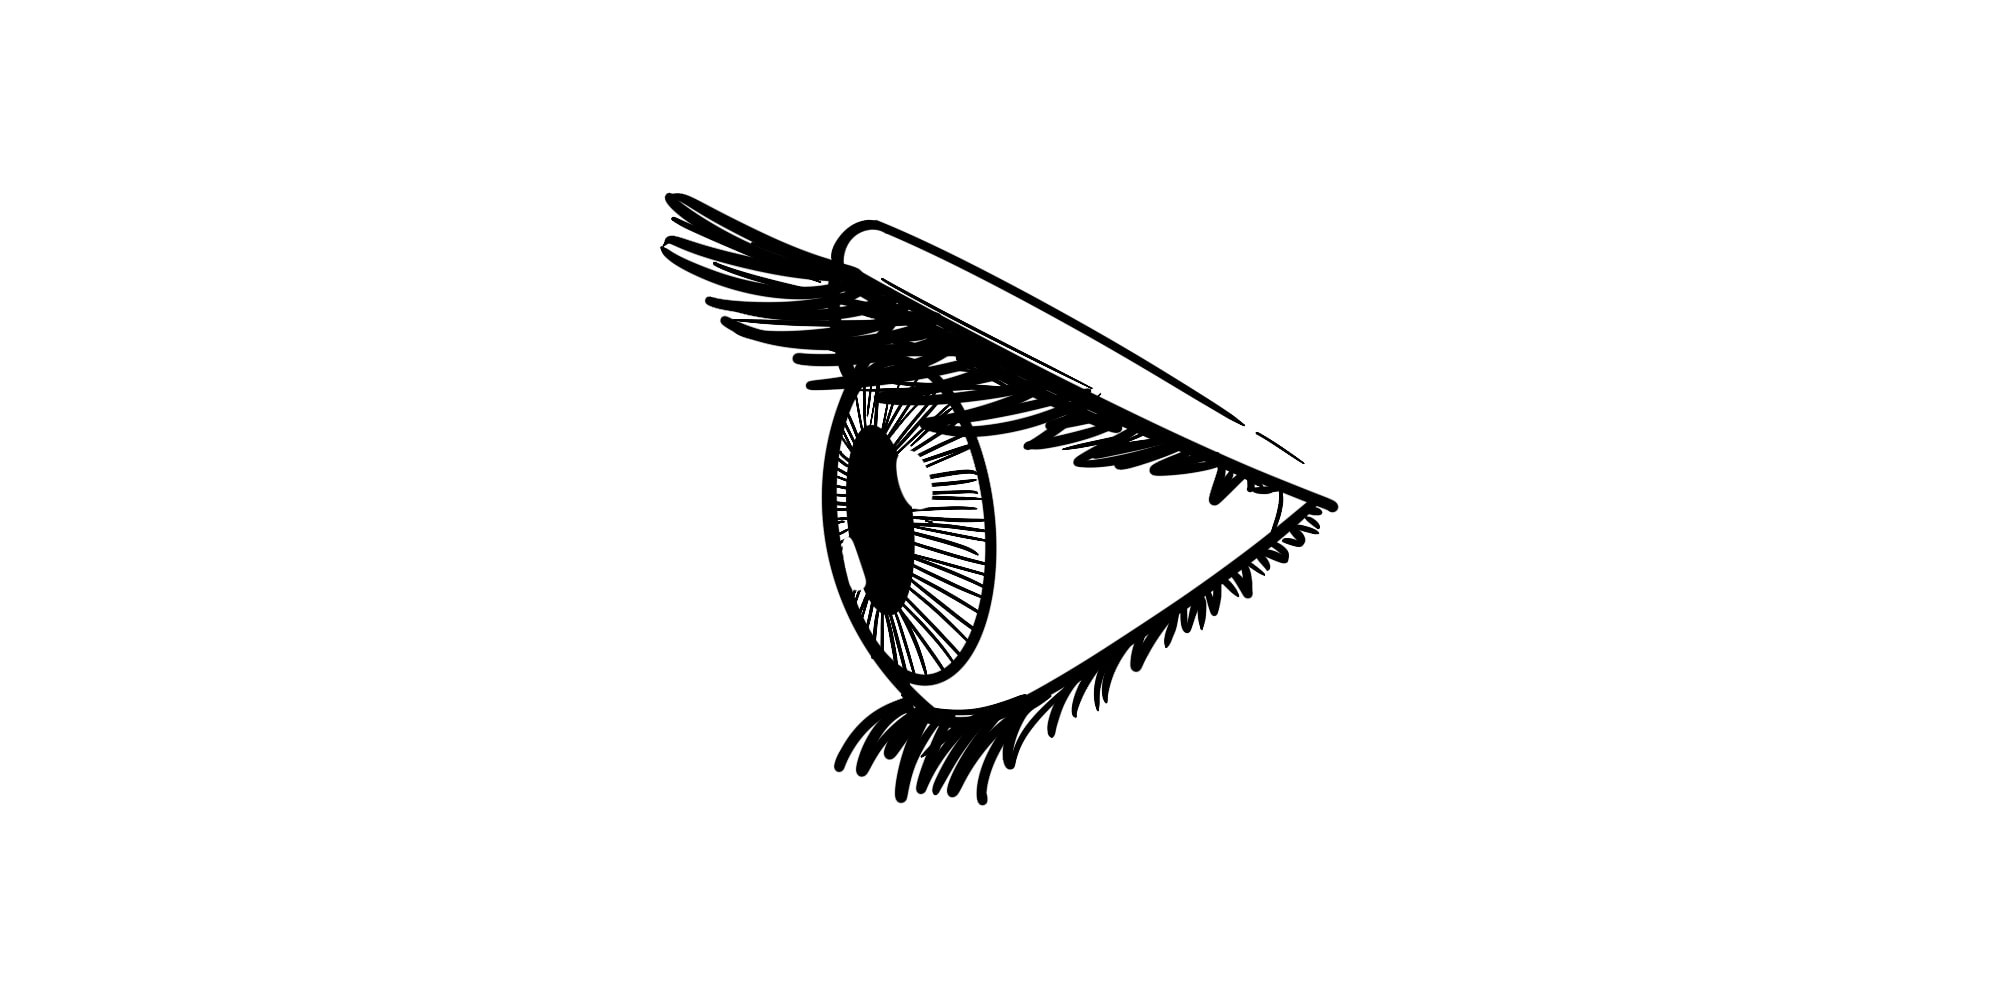 example of a finished eye drawing from the side view